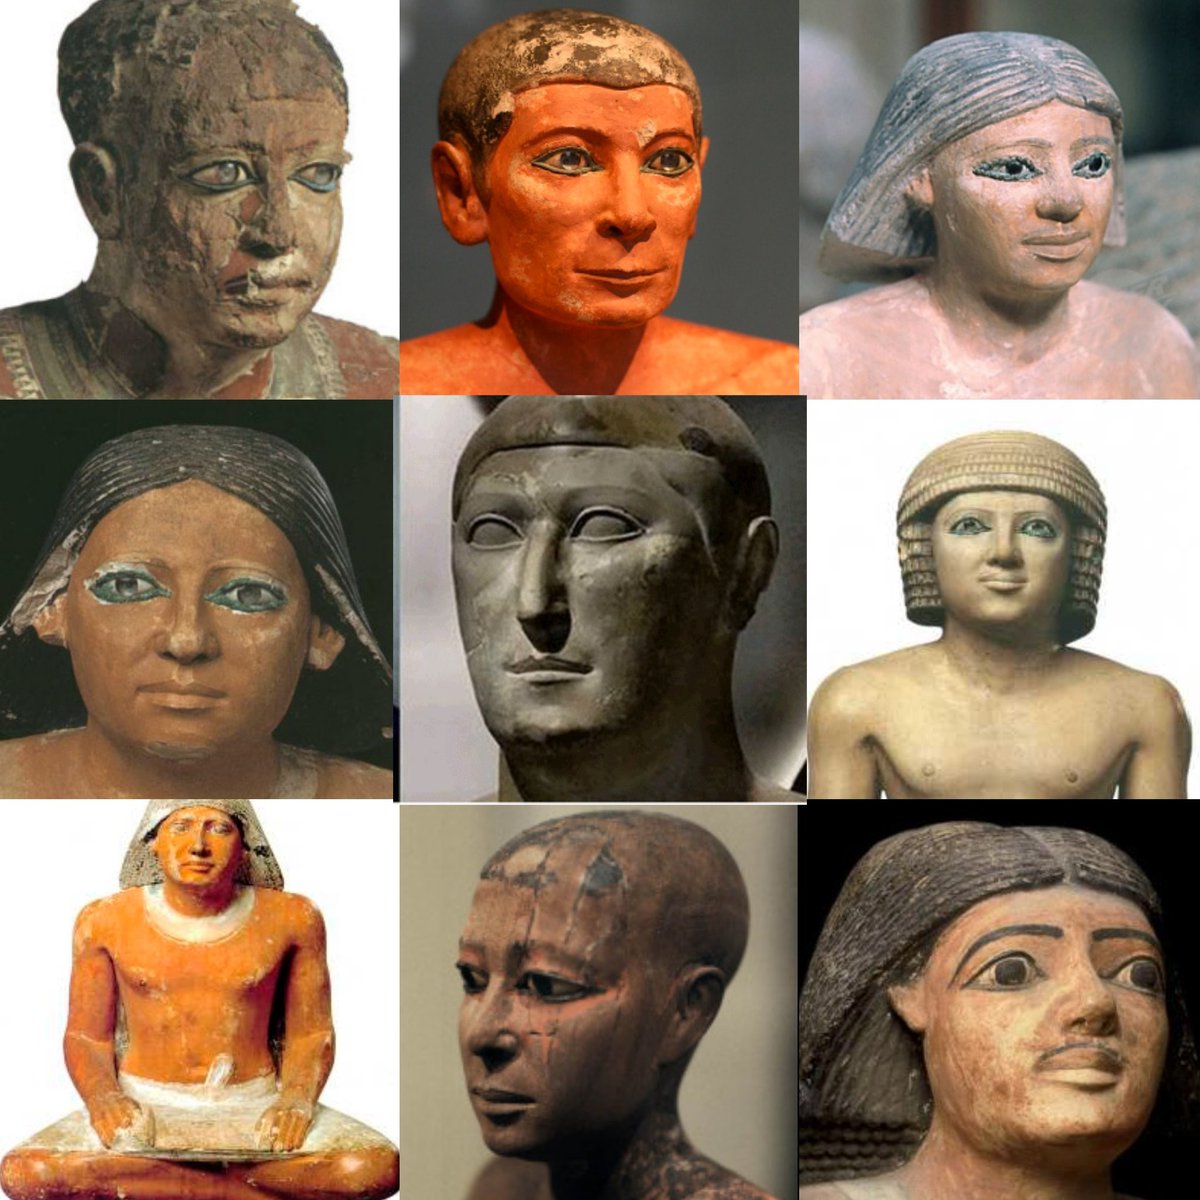 "Ugghhghh but the earlier populations of egypt must have been black, then they later mixed with th-"No, they were not, no bro, they did not mix.All these faces are of the earliest dynasty, the pyramid builders dynasty.  https://twitter.com/RobbinBandz/status/1313629679715340288